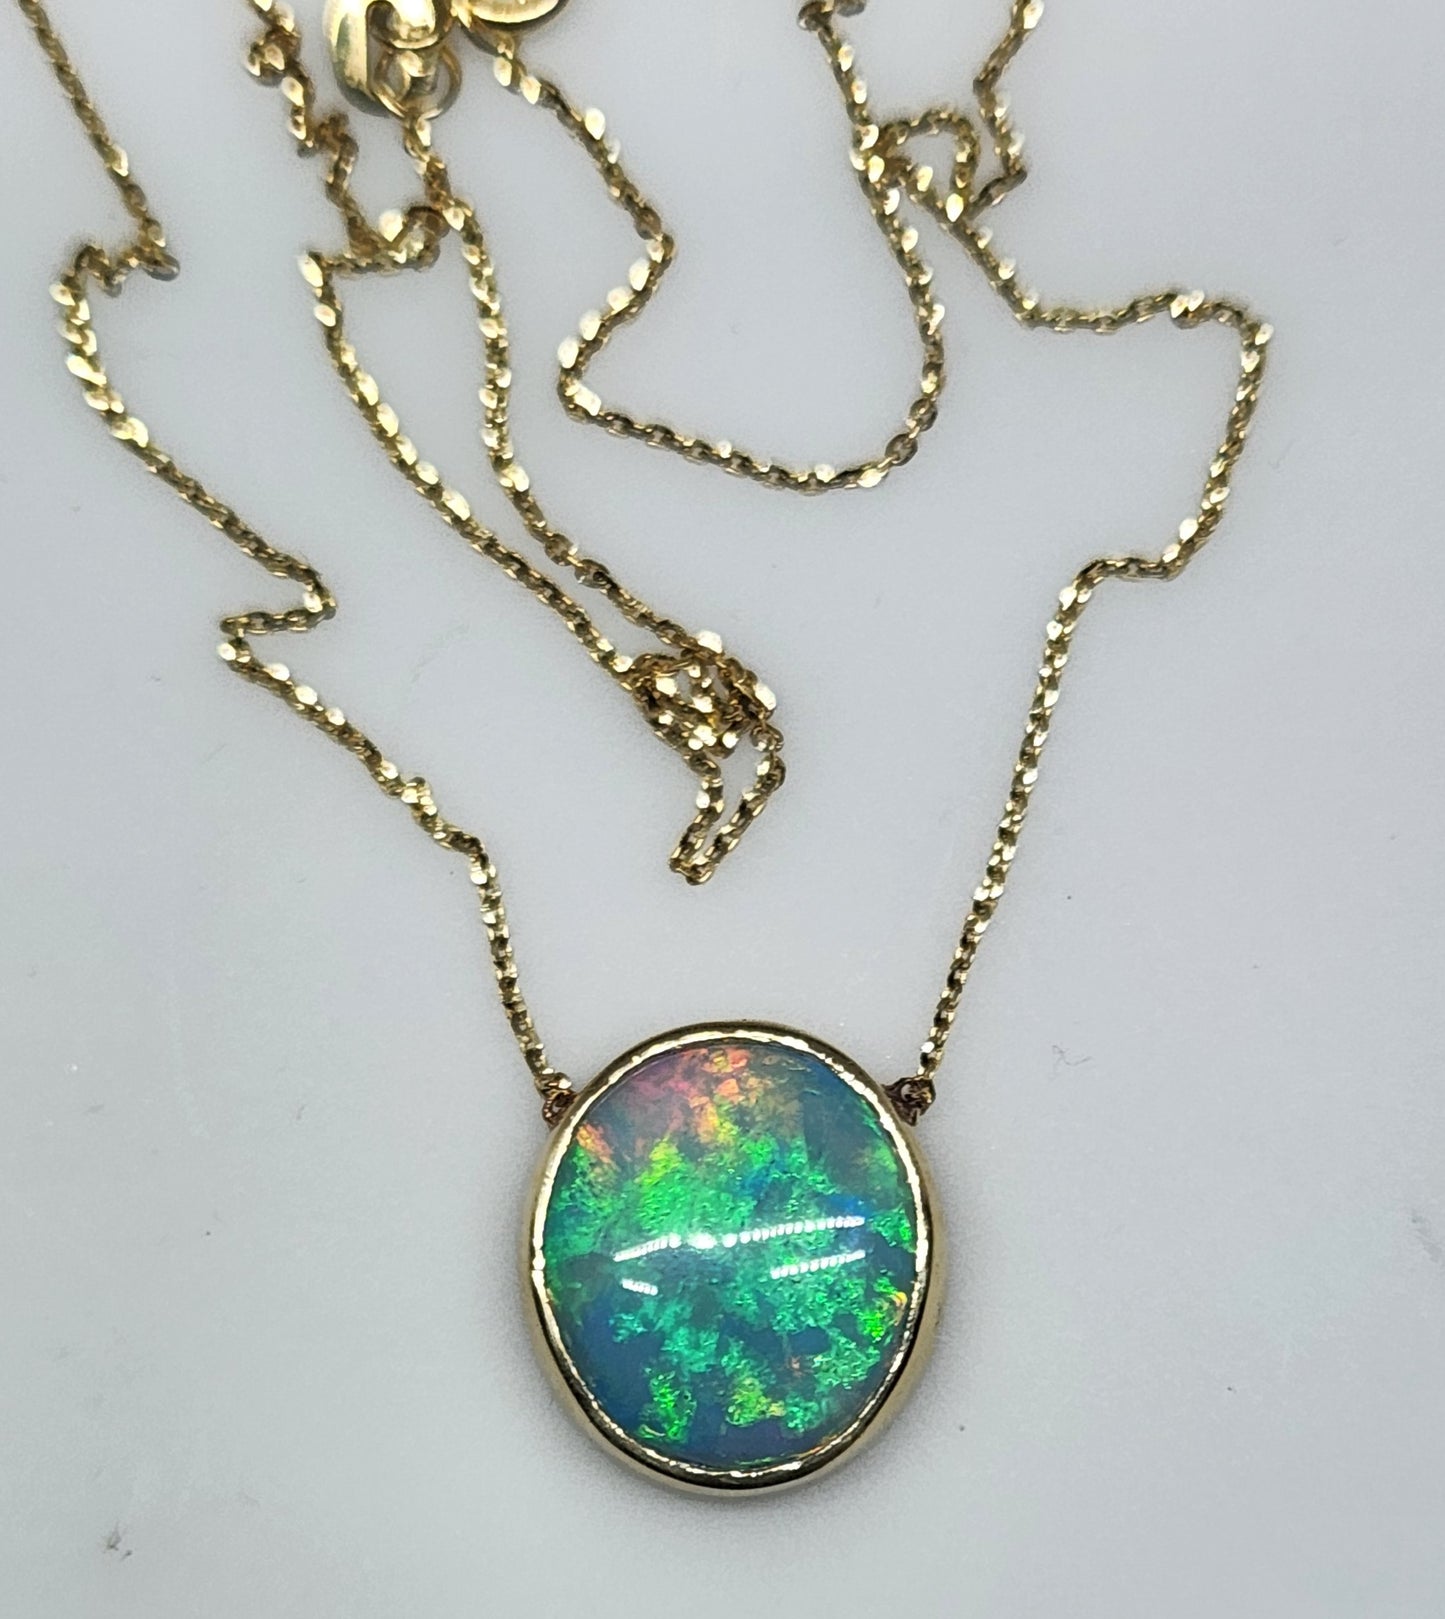 Blue Opal Pendant 14k Yellow Gold Chain Necklace #420